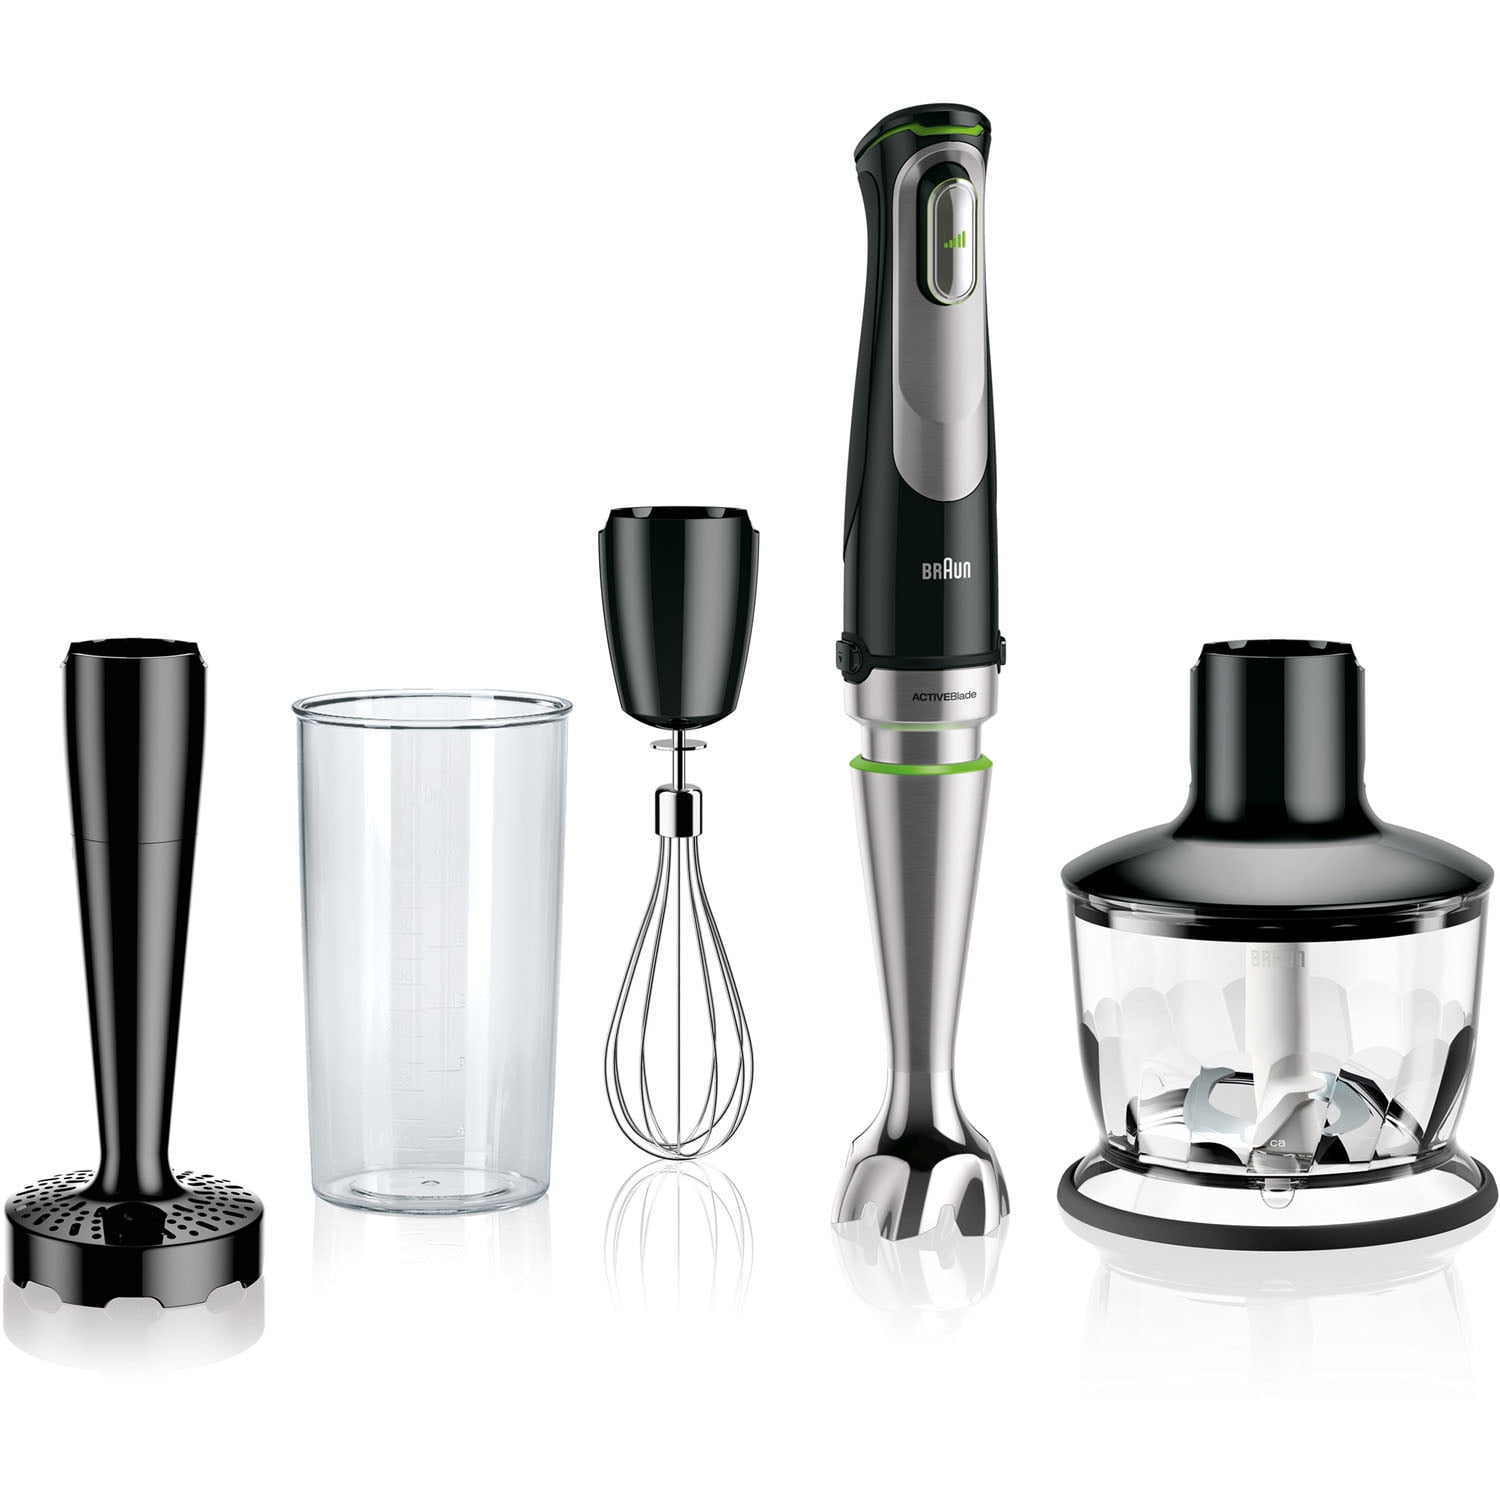 Braun Multiquick 9 Hand Blender with ActiveBlade Technology and 2